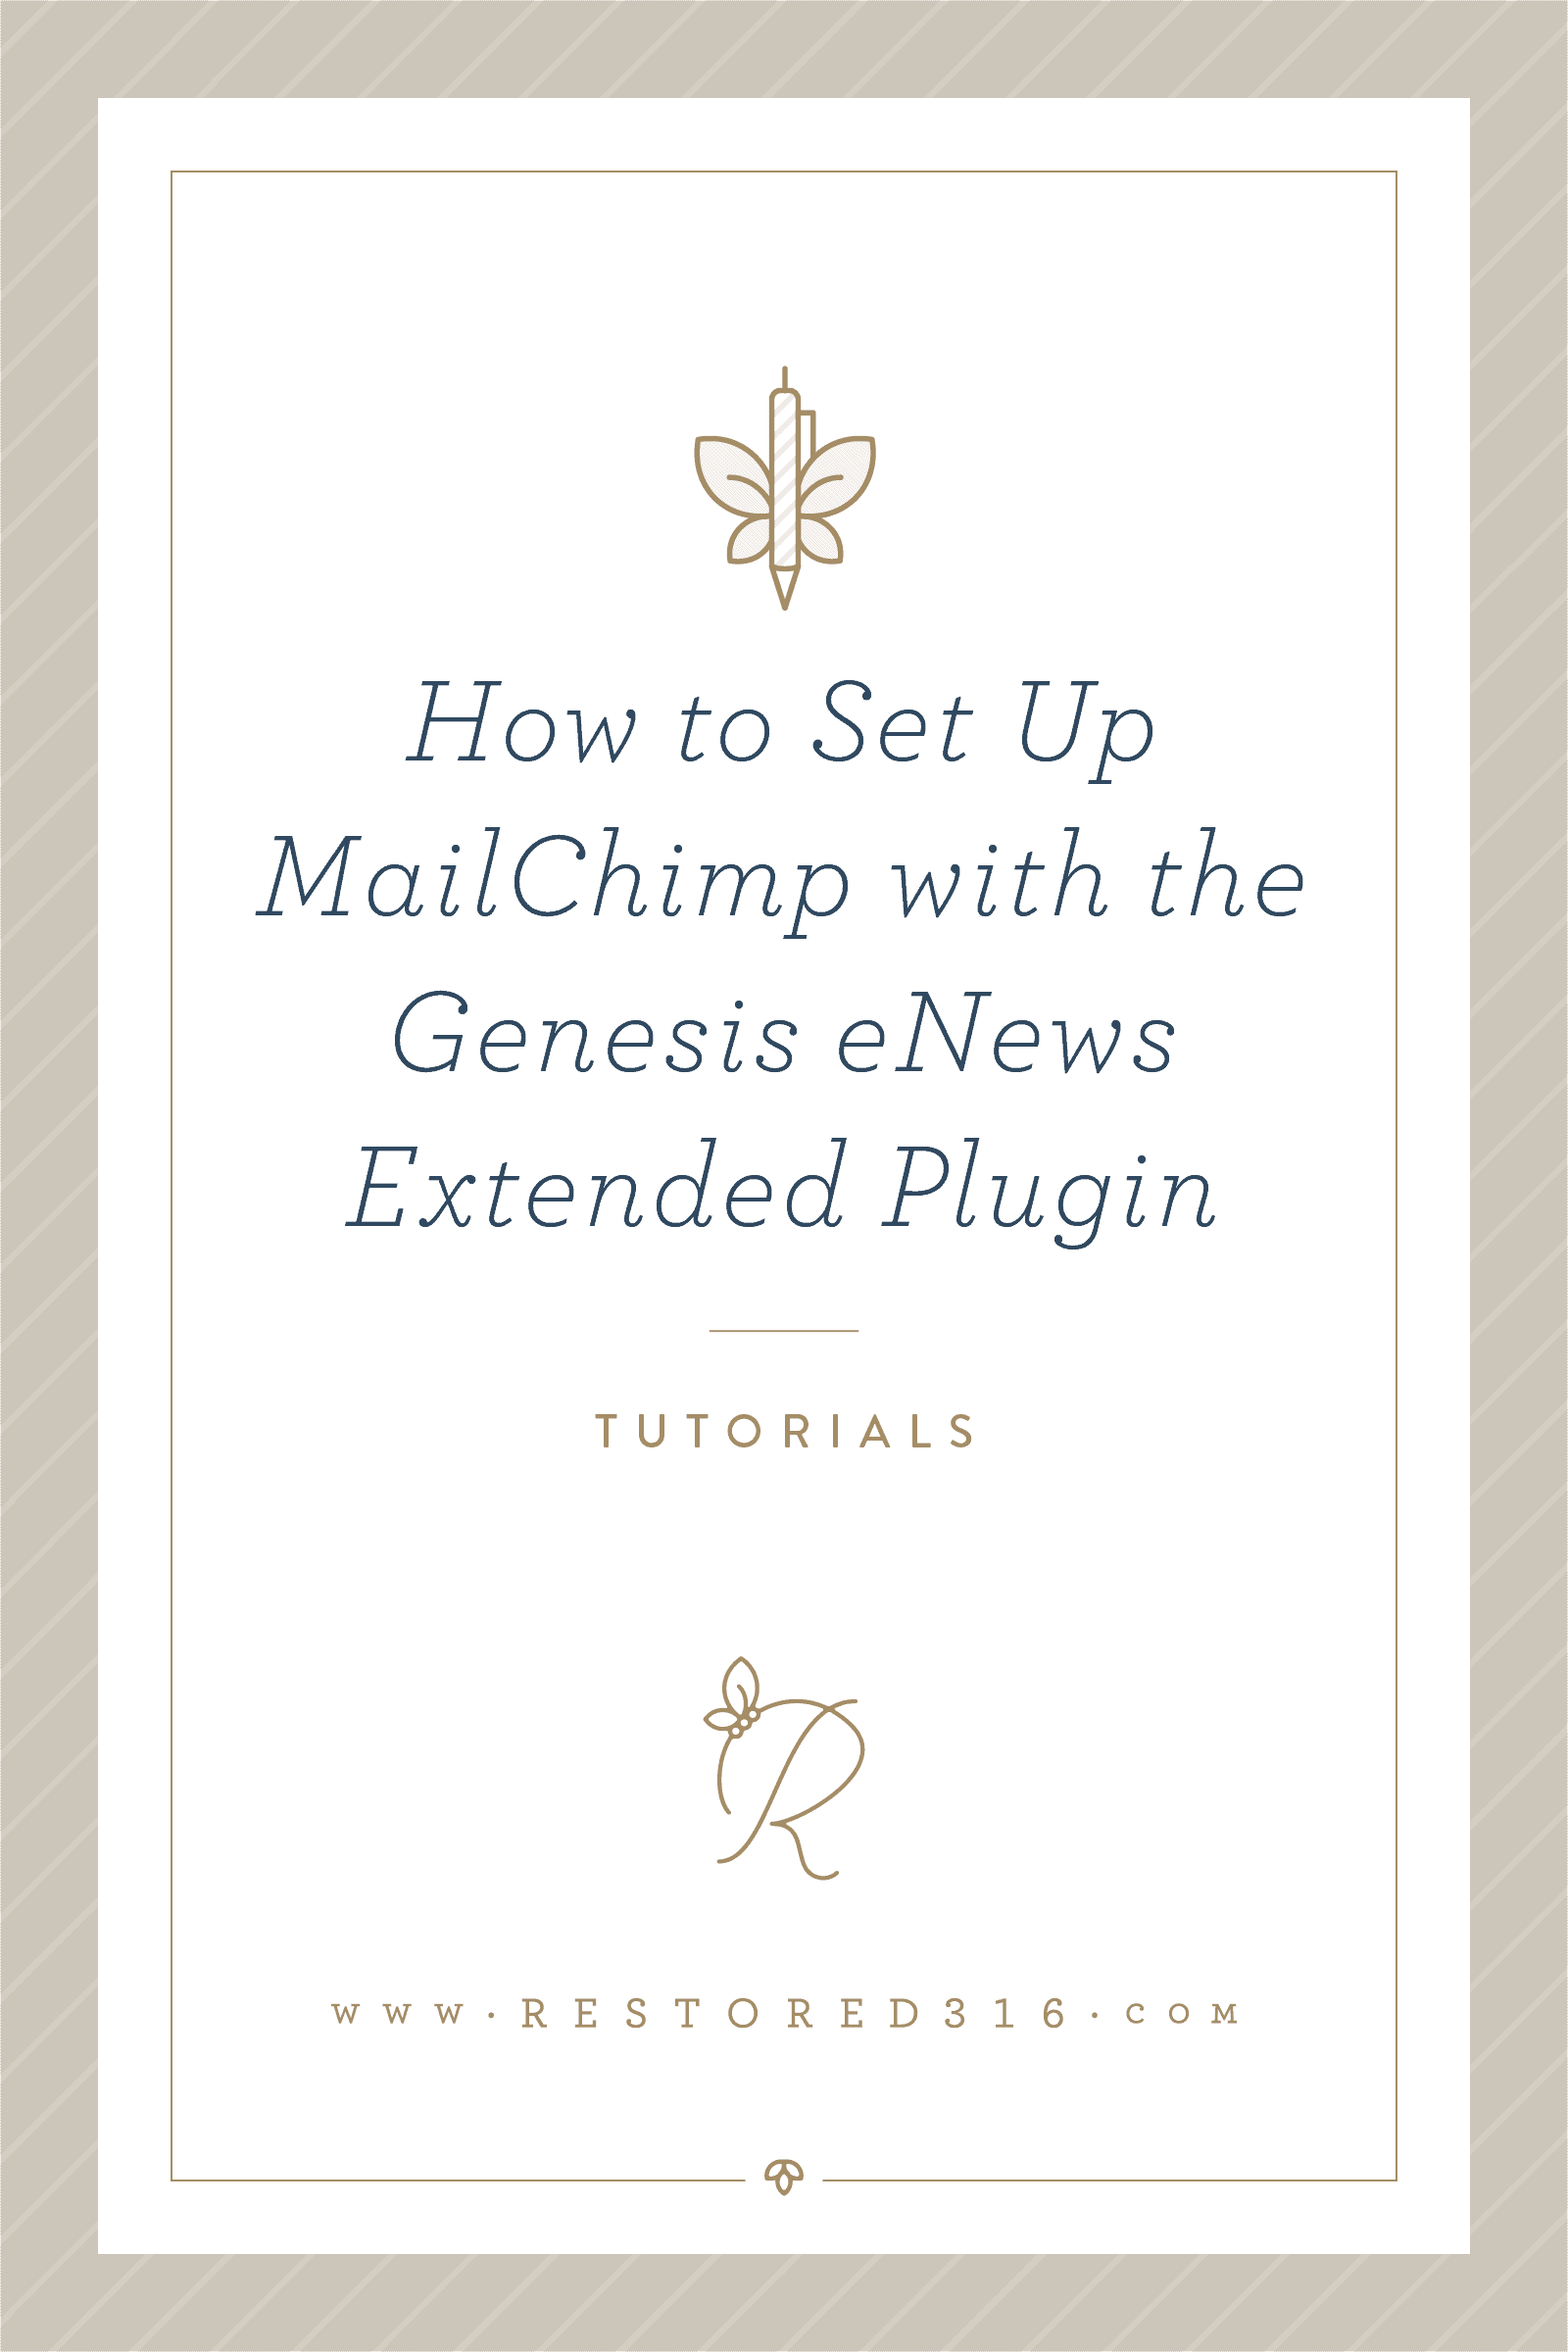 How to set up MailChimp with the Genesis eNews Extended Plugin